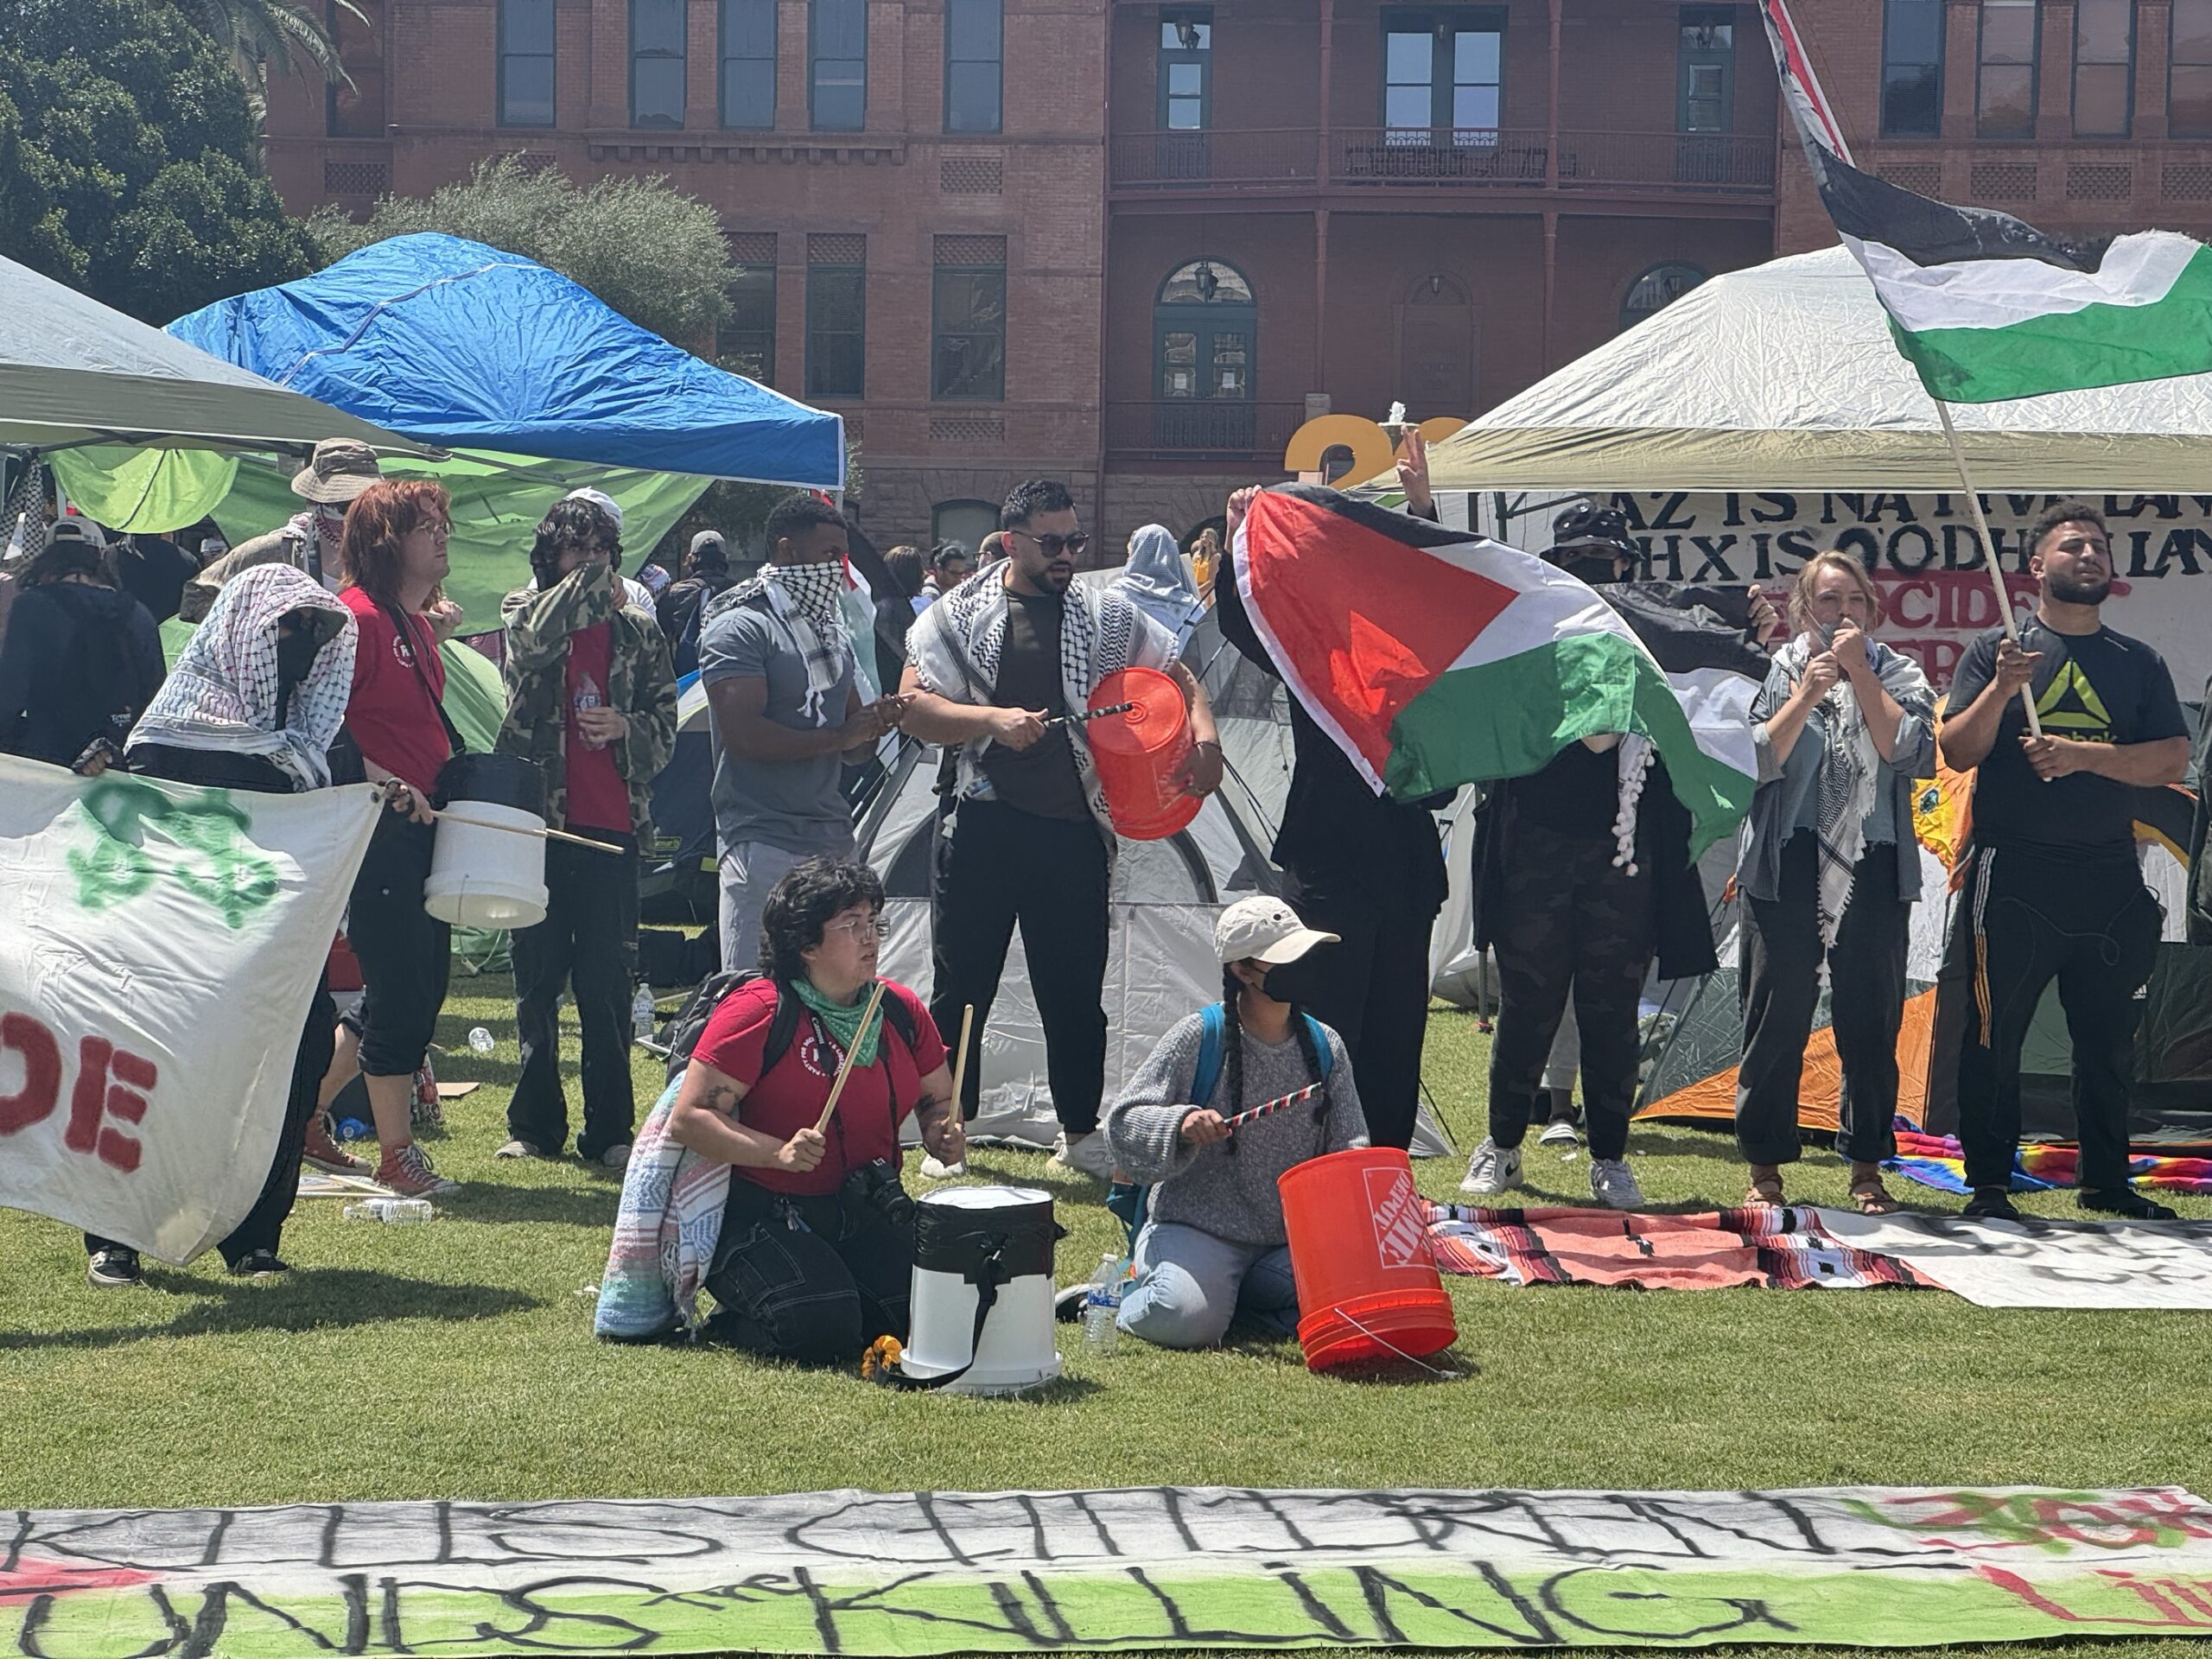 Pro-Palestine activists set up tents police tore down at ASU campus